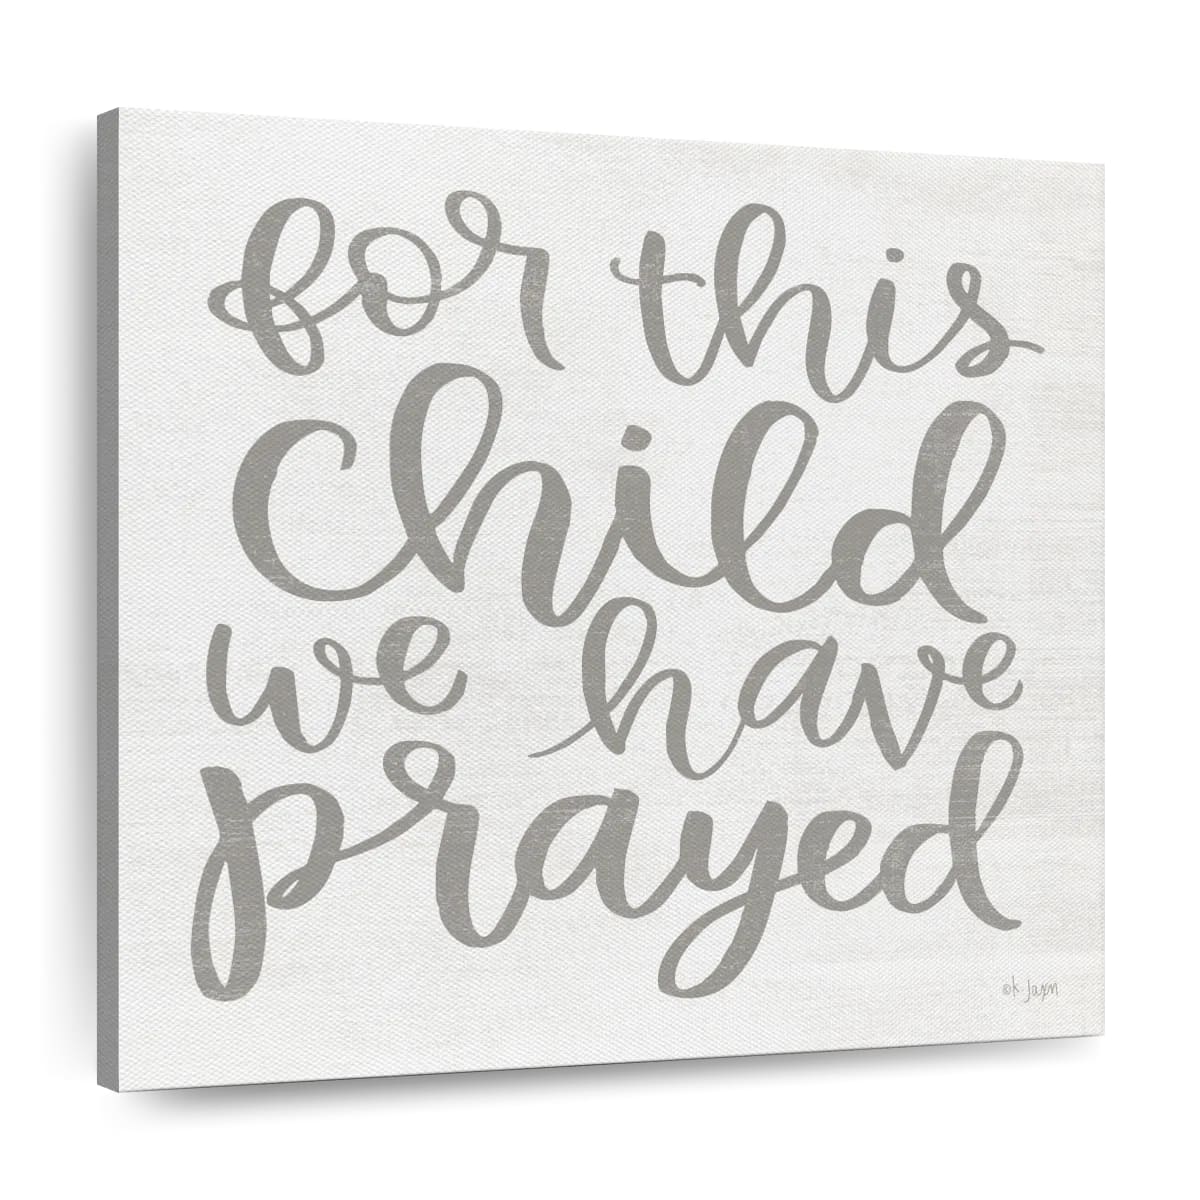 For this Child We Have Prayed Square Canvas Wall Art - Bible Verse Wall Art Canvas - Religious Wall Hanging